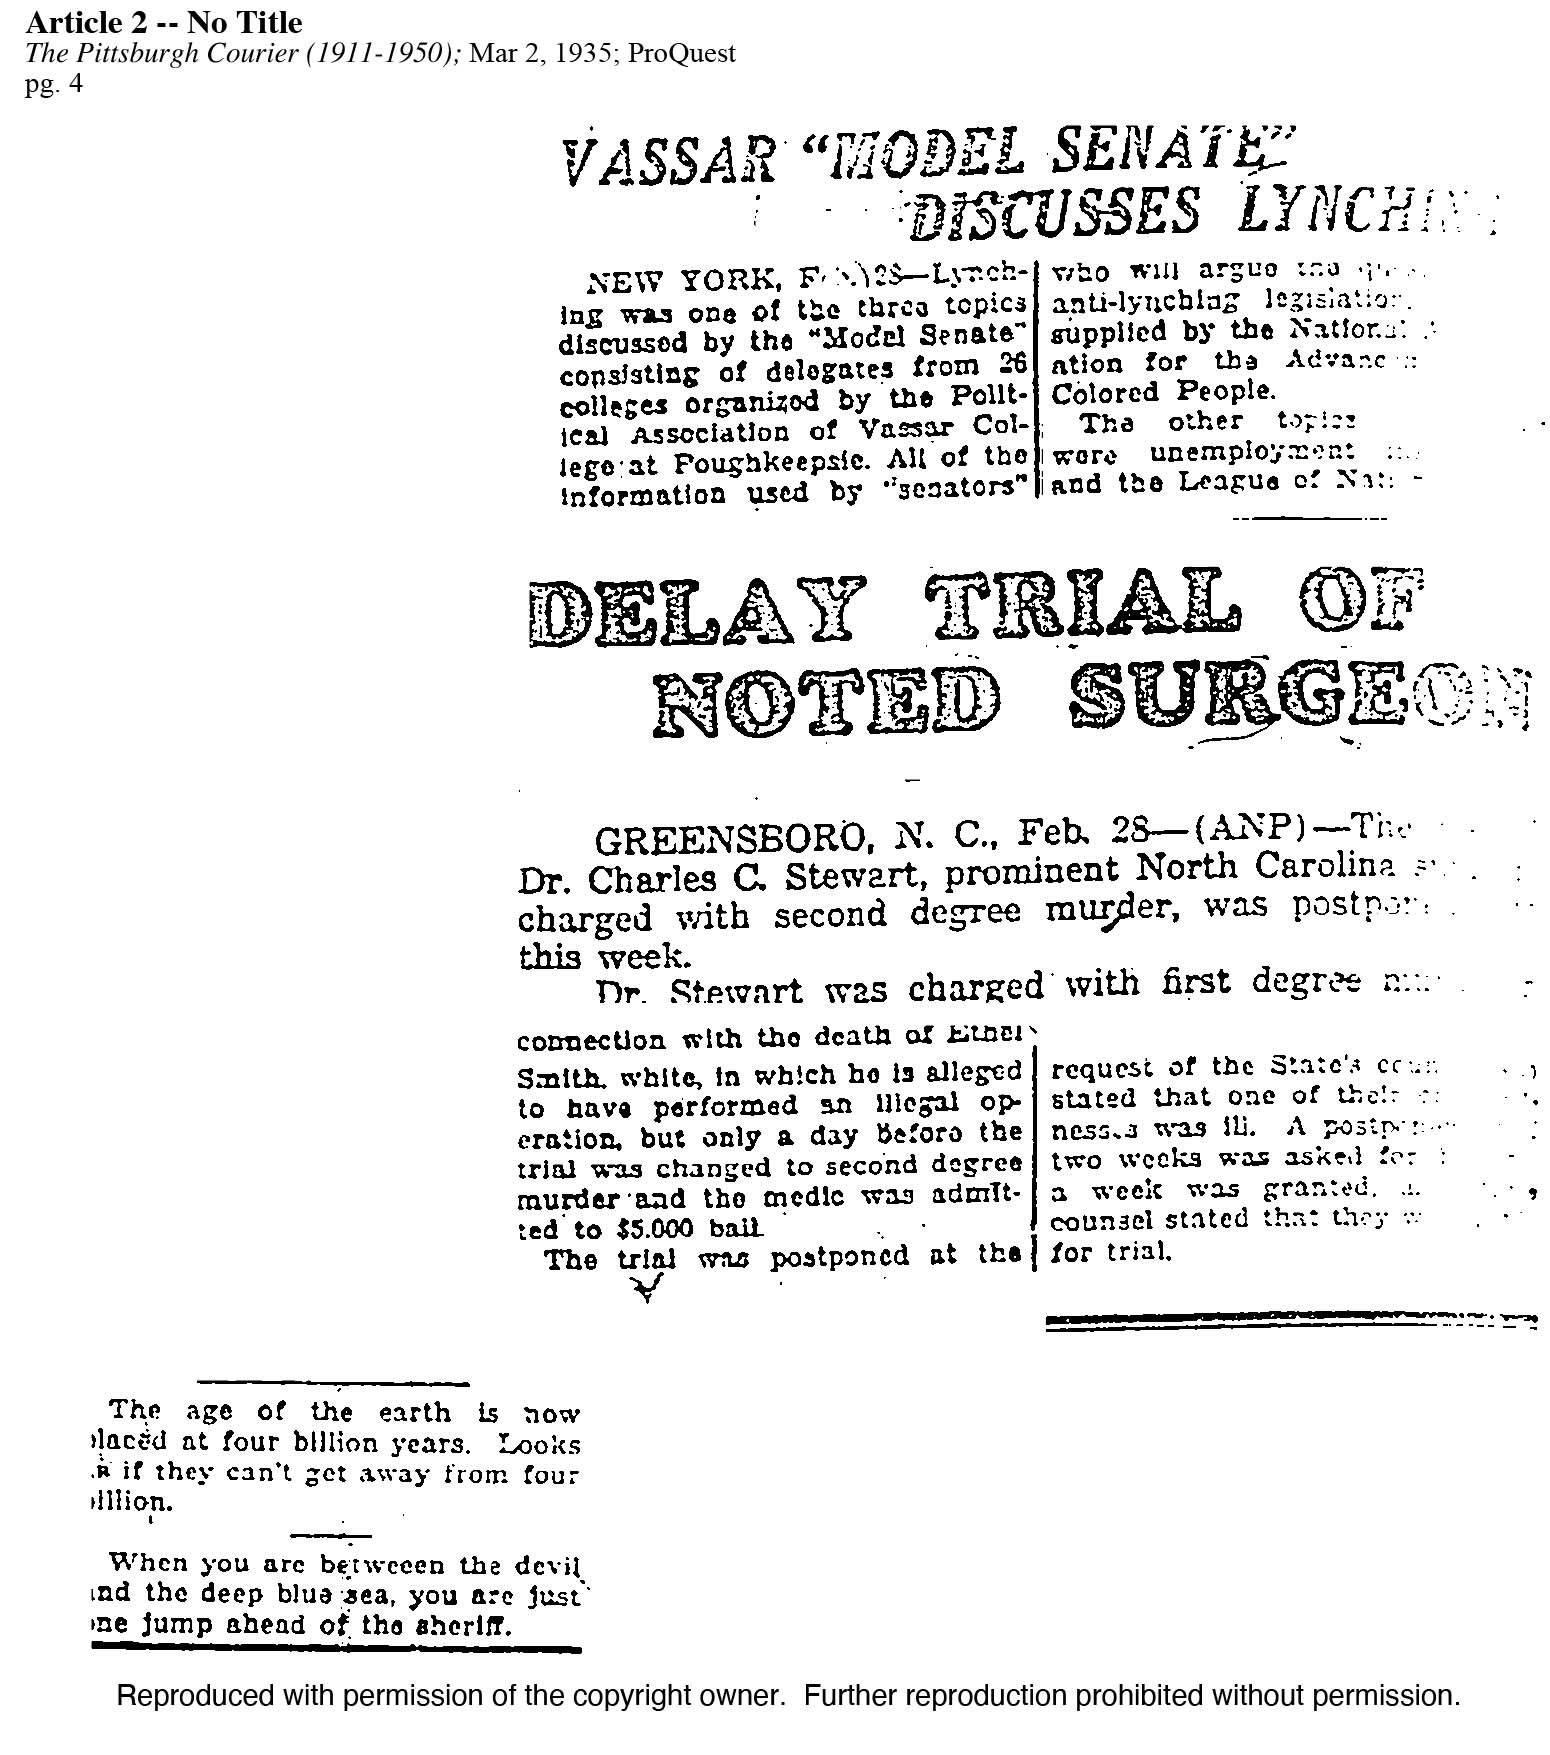 Original article scan for Vassar Model Senate Discusses Lynching; The Pittsburgh Courier (1911-1950); Mar 2, 1935; ProQuest pg. 4